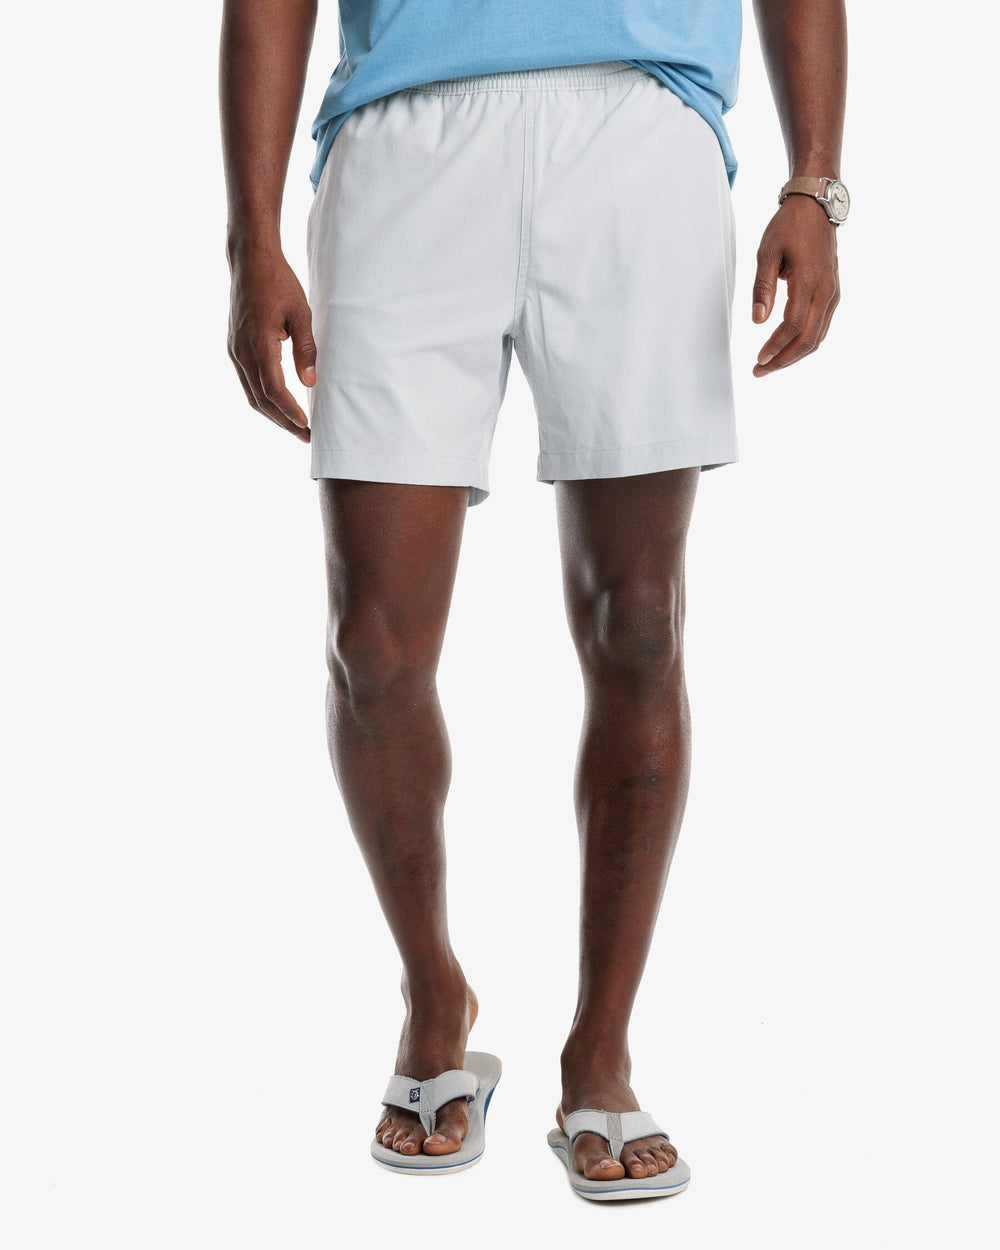 The model front view of the Men's Rip Channel 6 Inch Performance Short by Southern Tide - Seagull Grey